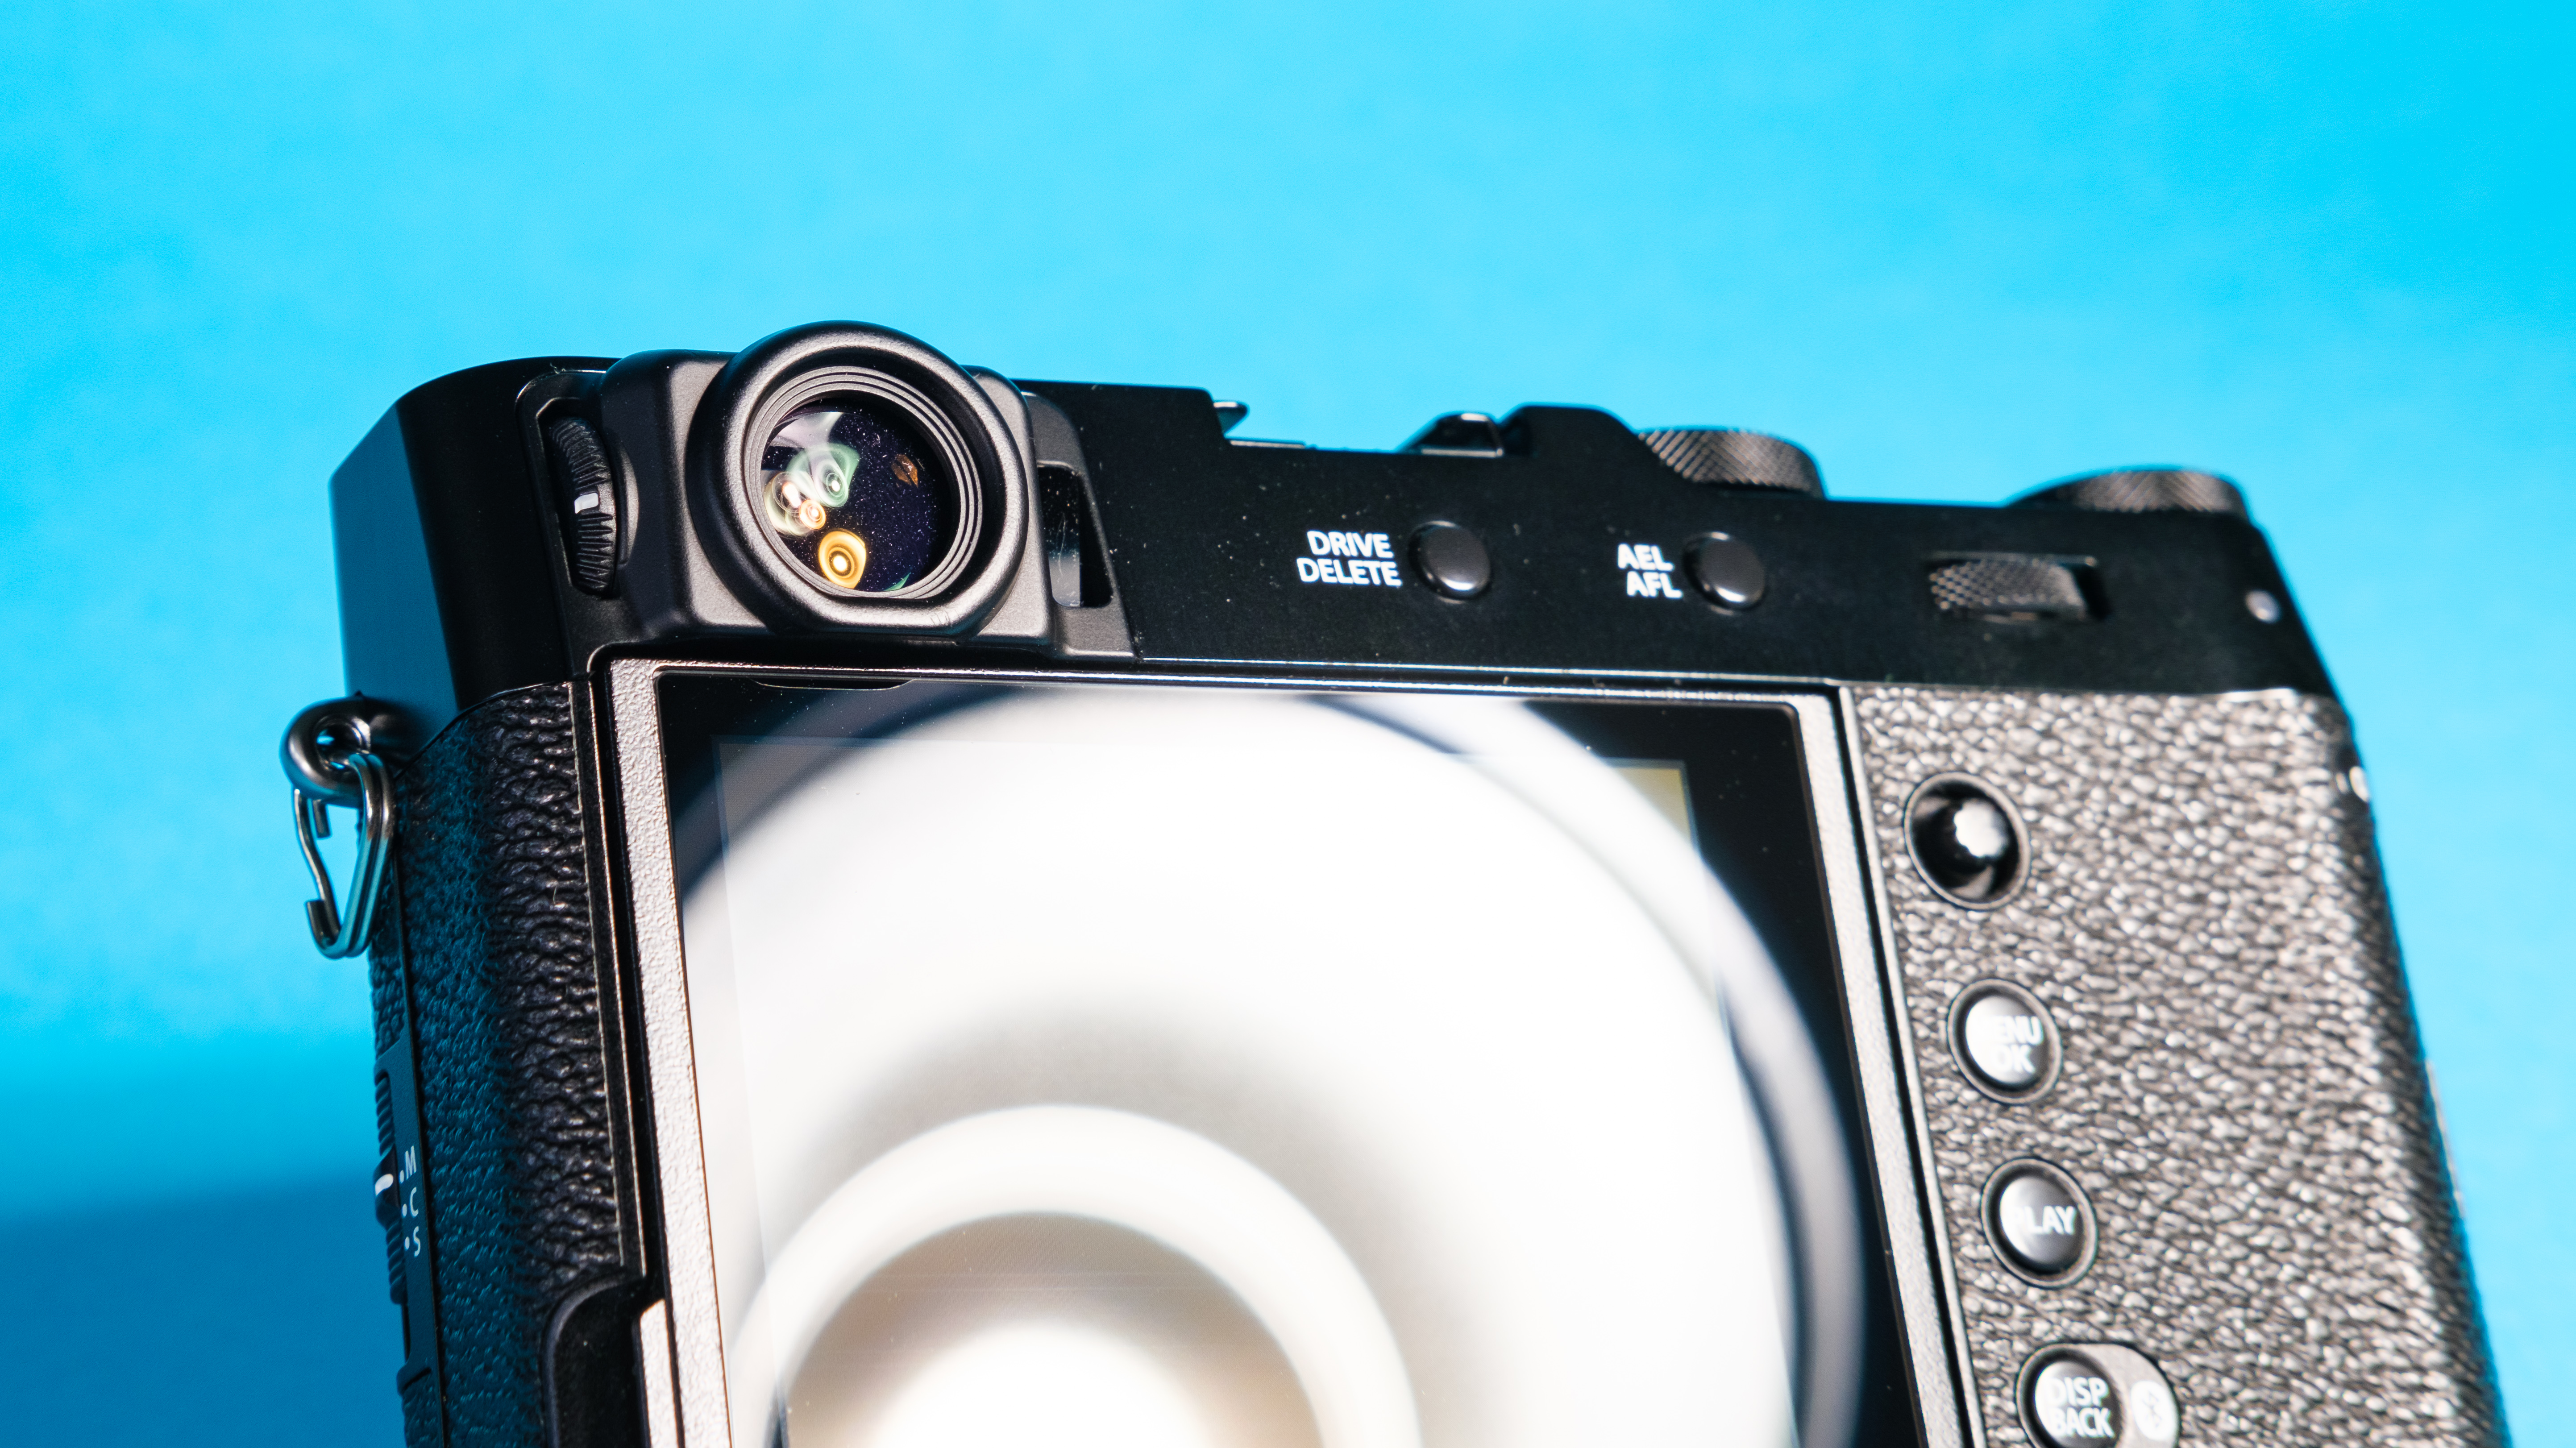 The rear of the Fujifilm X100VI mirrorless camera against a blue background with the viewfinder window showing.